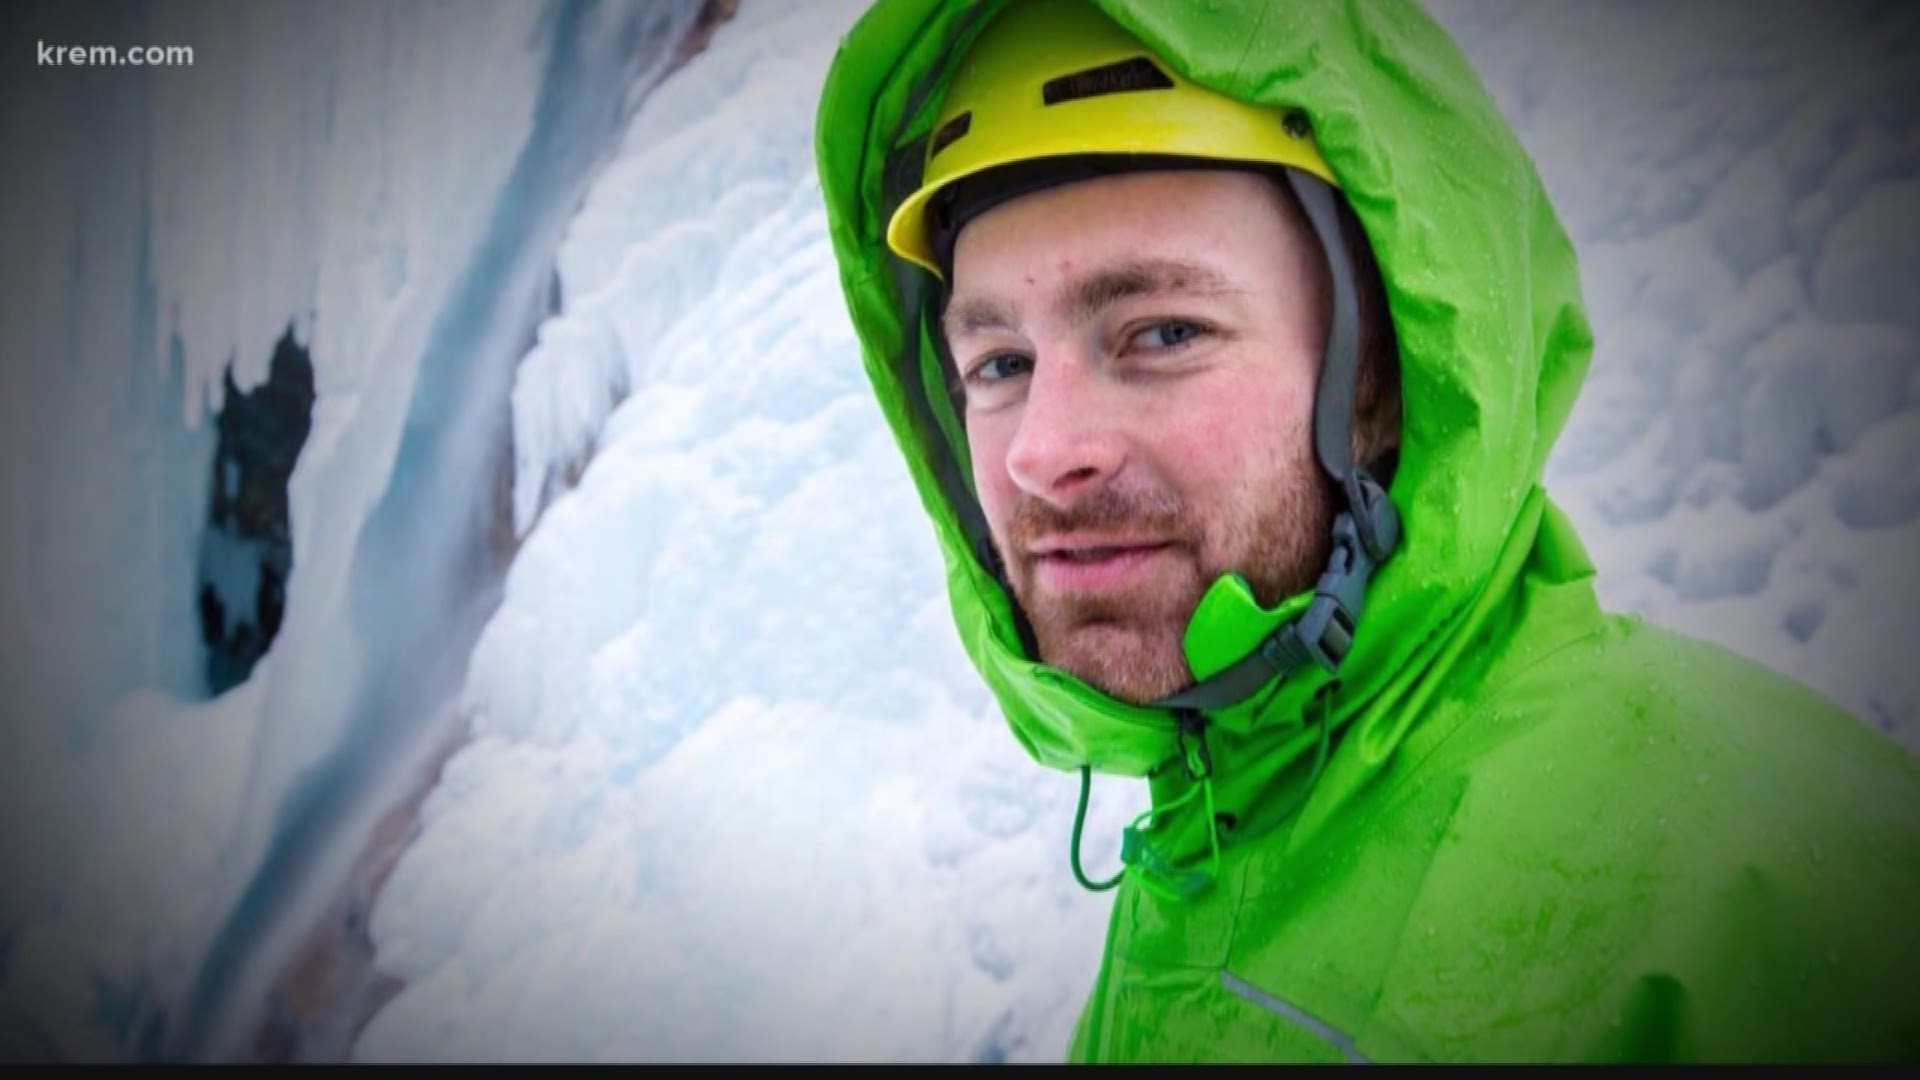 KREM Reporter Amanda Roley spoke with Parks Canada officials about the rescue effort that recovered the bodies of Spokane climber Jess Roskelly and two others.